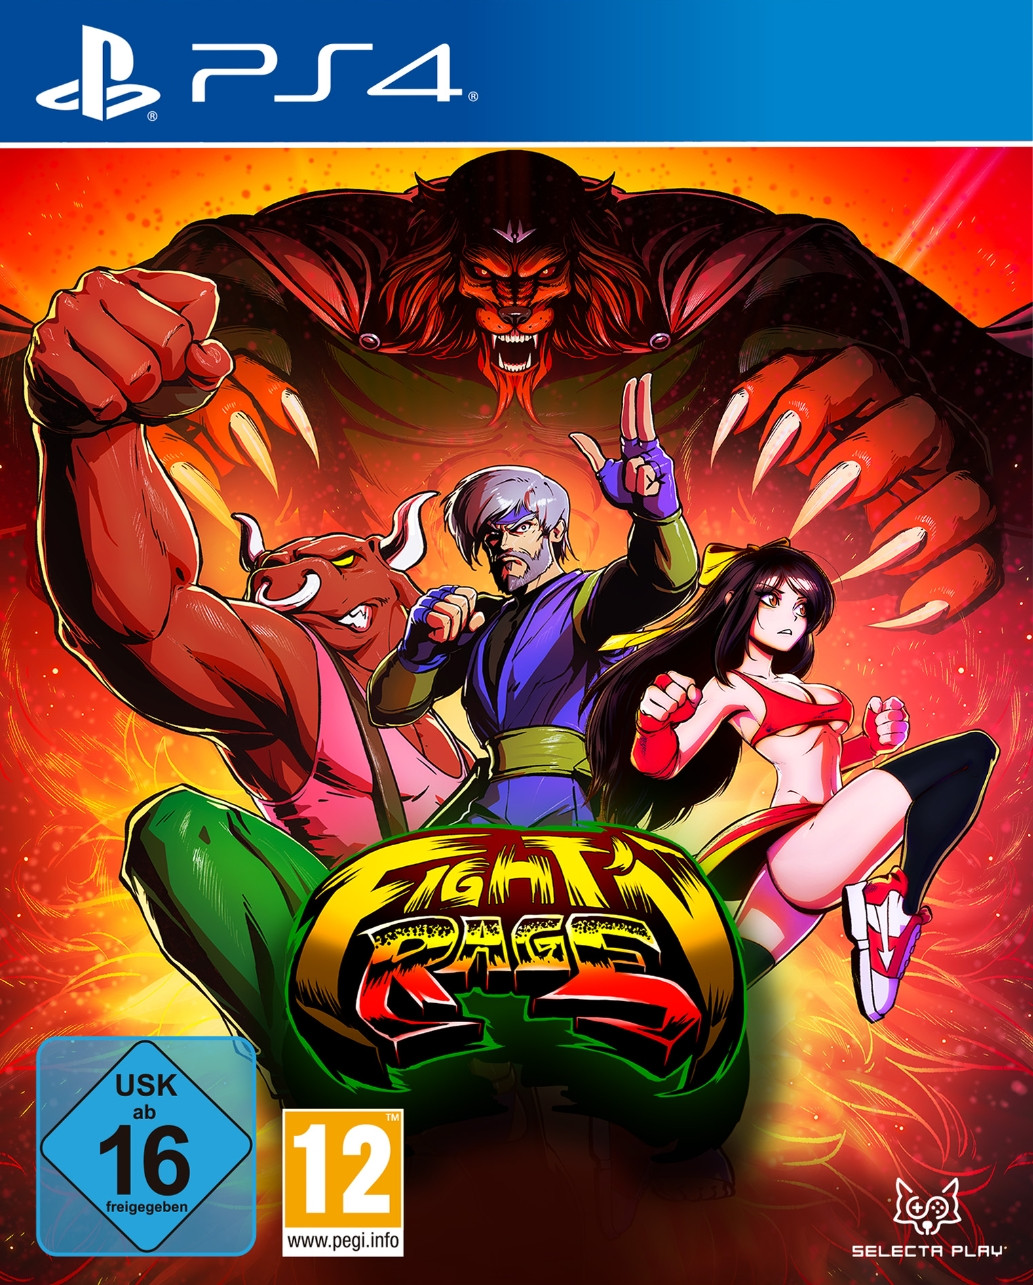 Fight'n Rage: 5th Anniversary - Limited Edition (PS4), Selecta Play